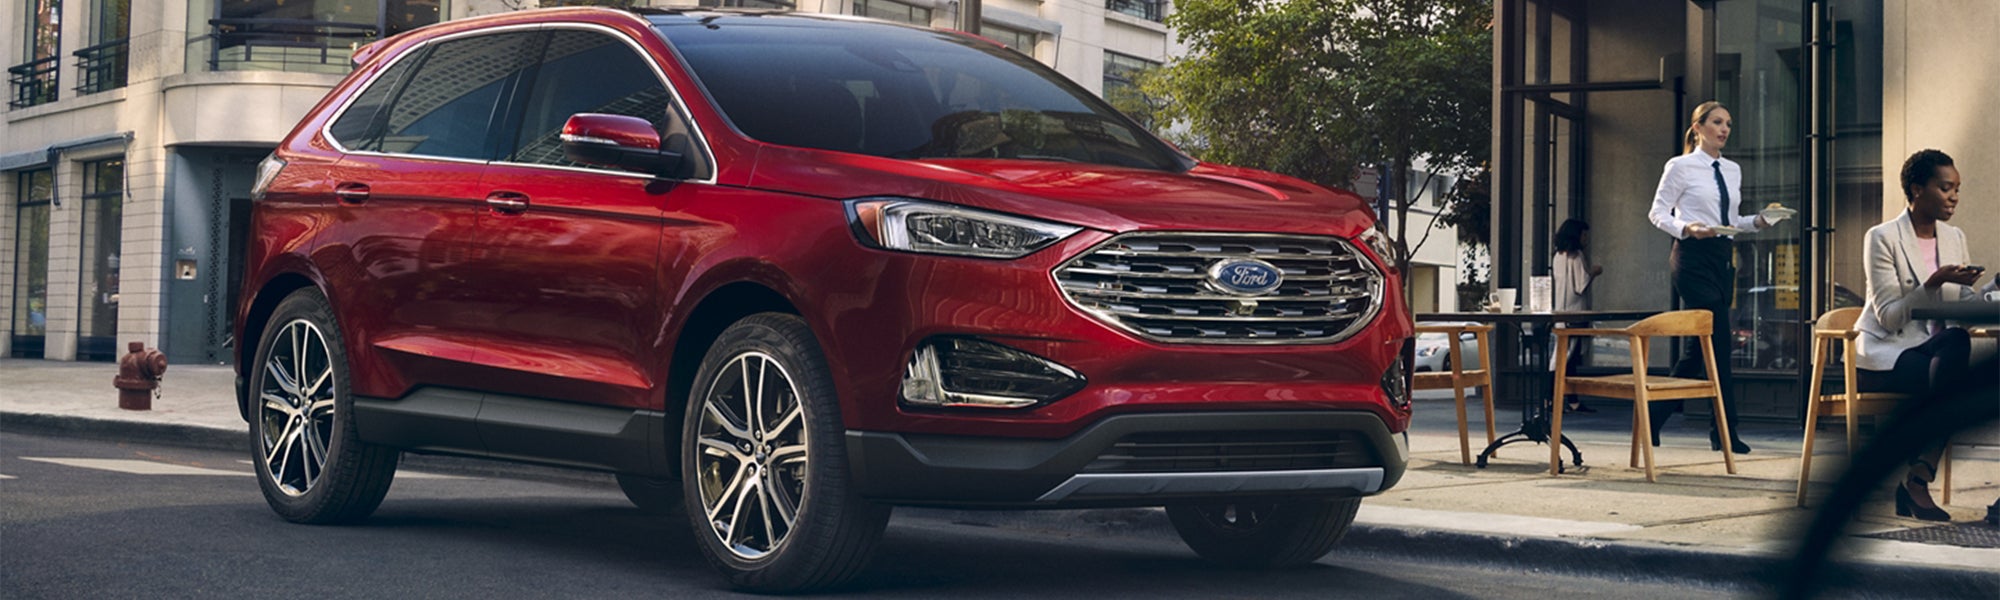 2020 Ford Edge Configurations